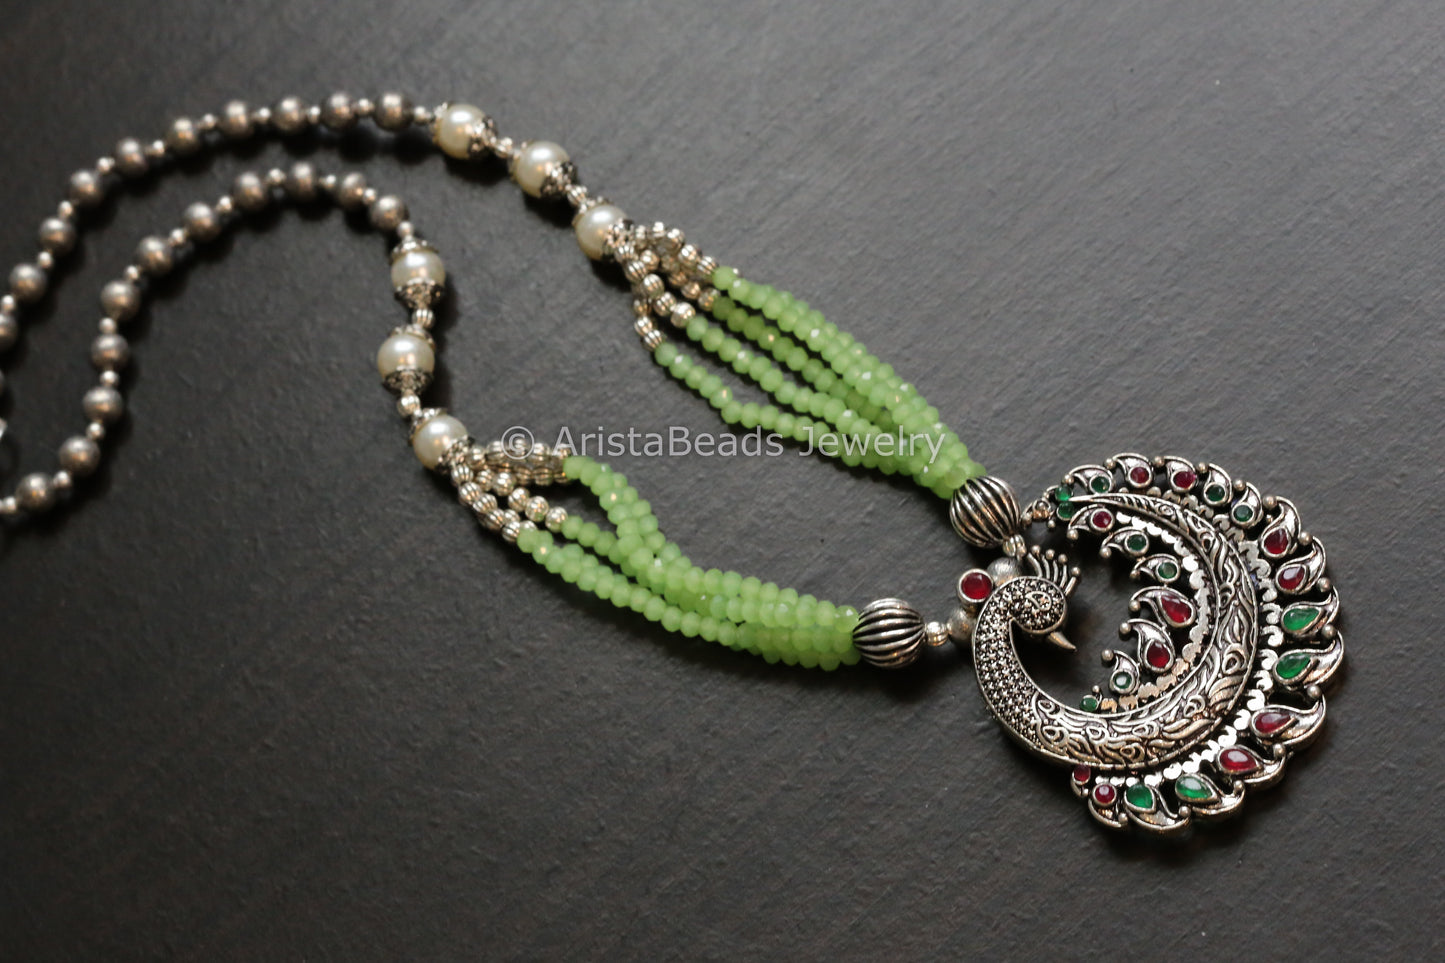 Peacock Oxidized Necklace - Pista Green Beads